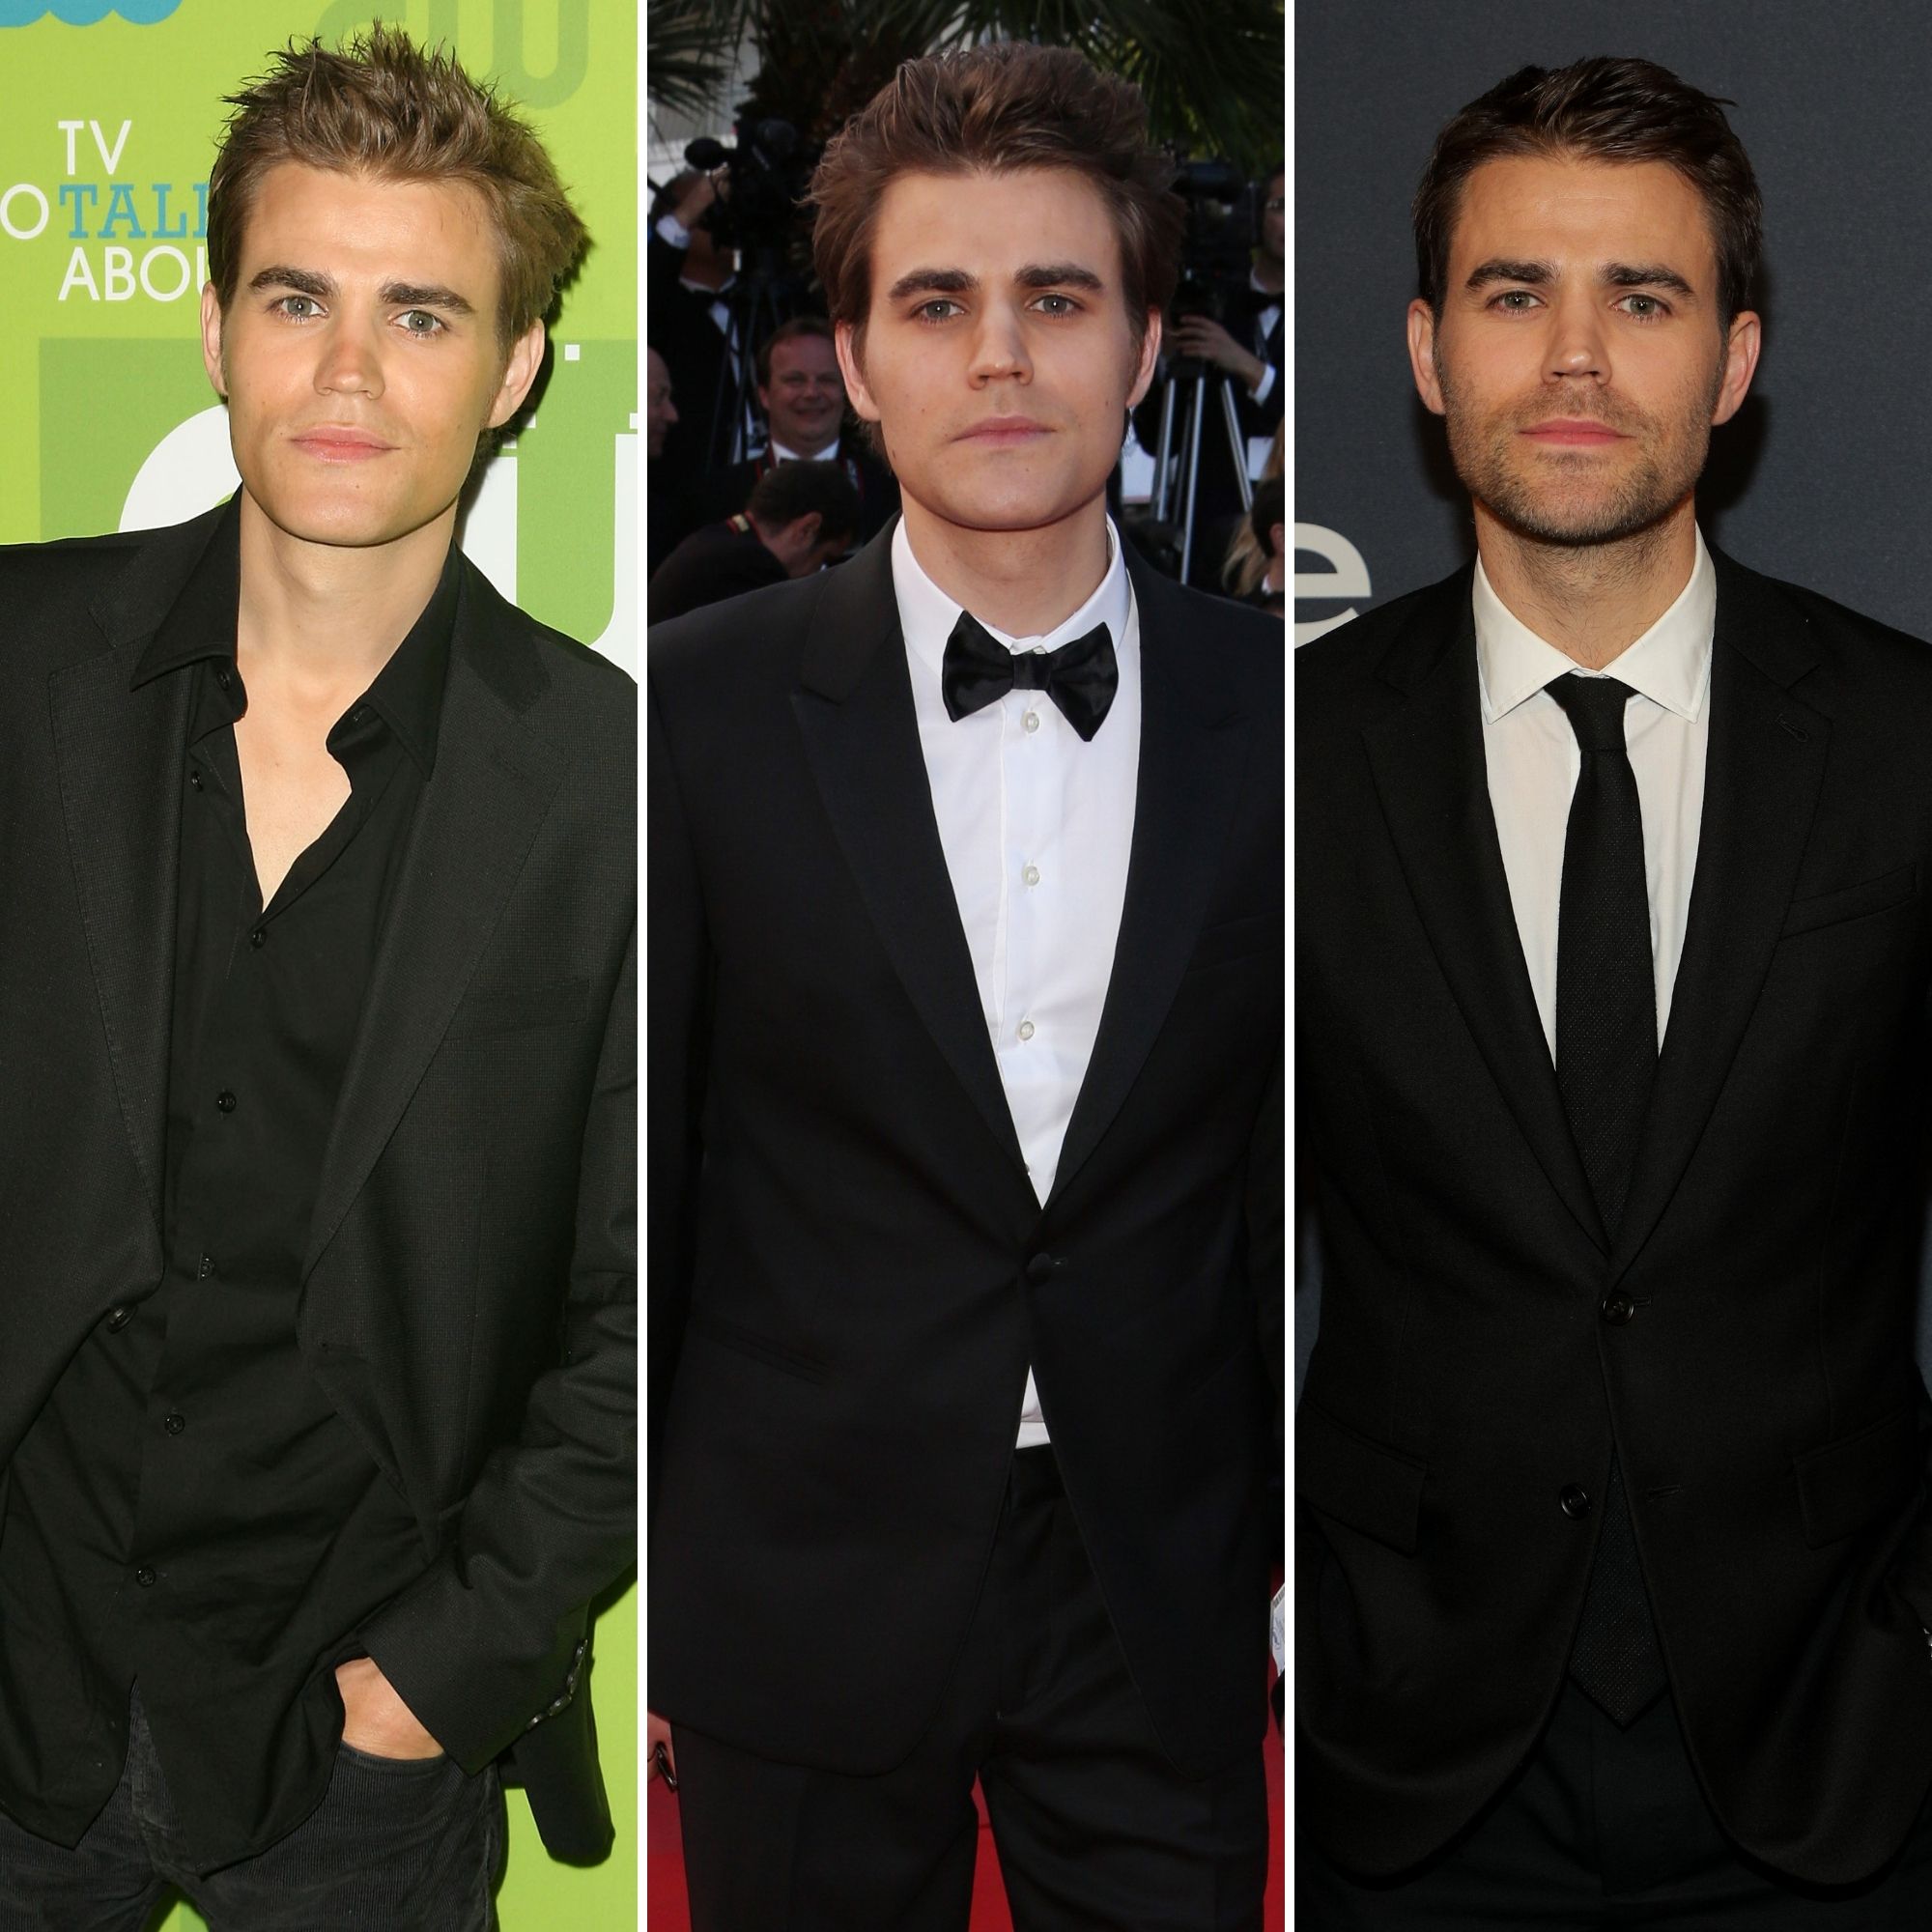 Paul Wesley's Transformation From 'Vampire Diaries' to Now Photos